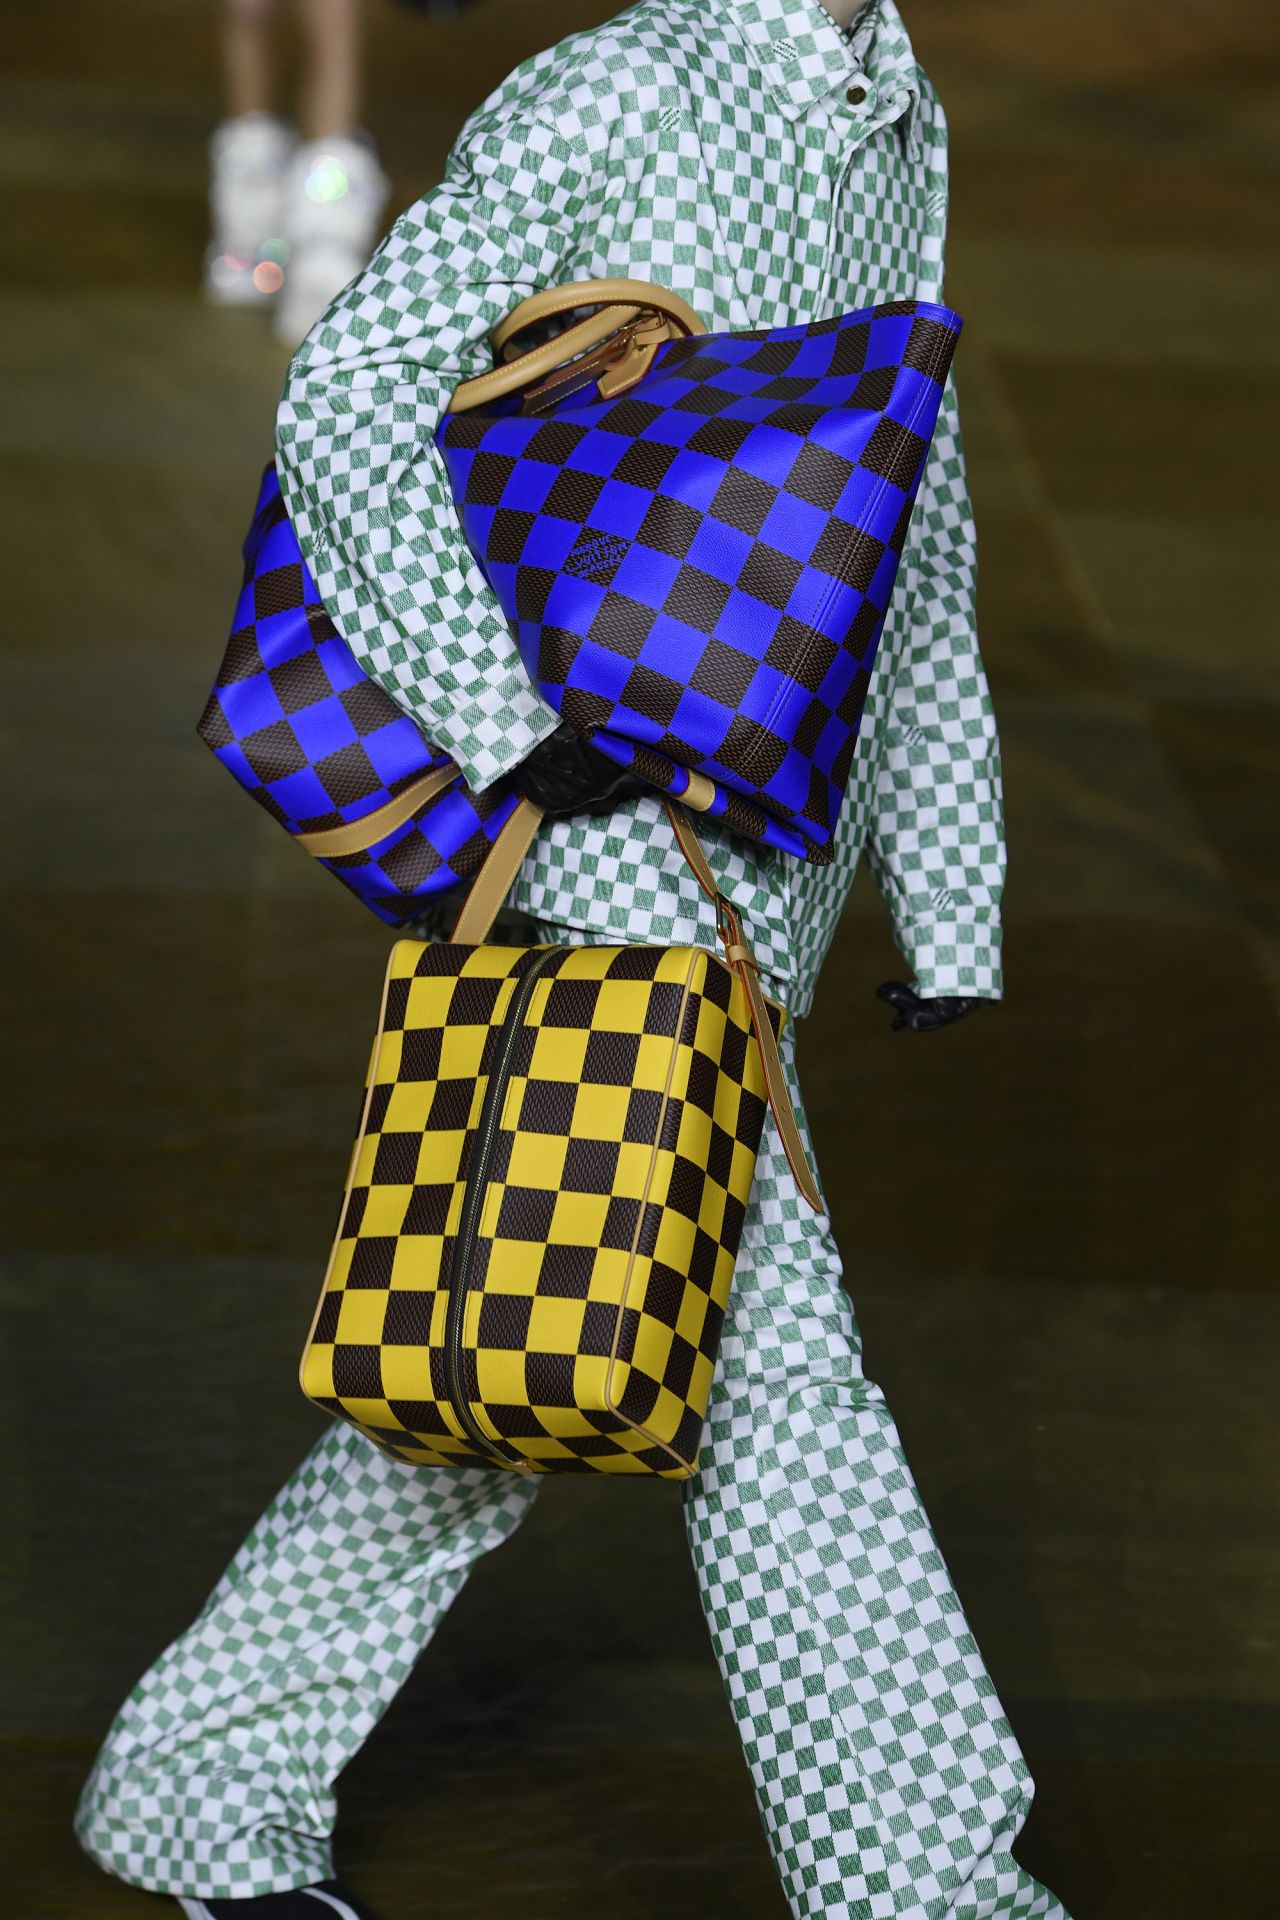 Pharrell's Debut Collection for Louis Vuitton Spotlights Art of Henry Taylor  - Alt A Review